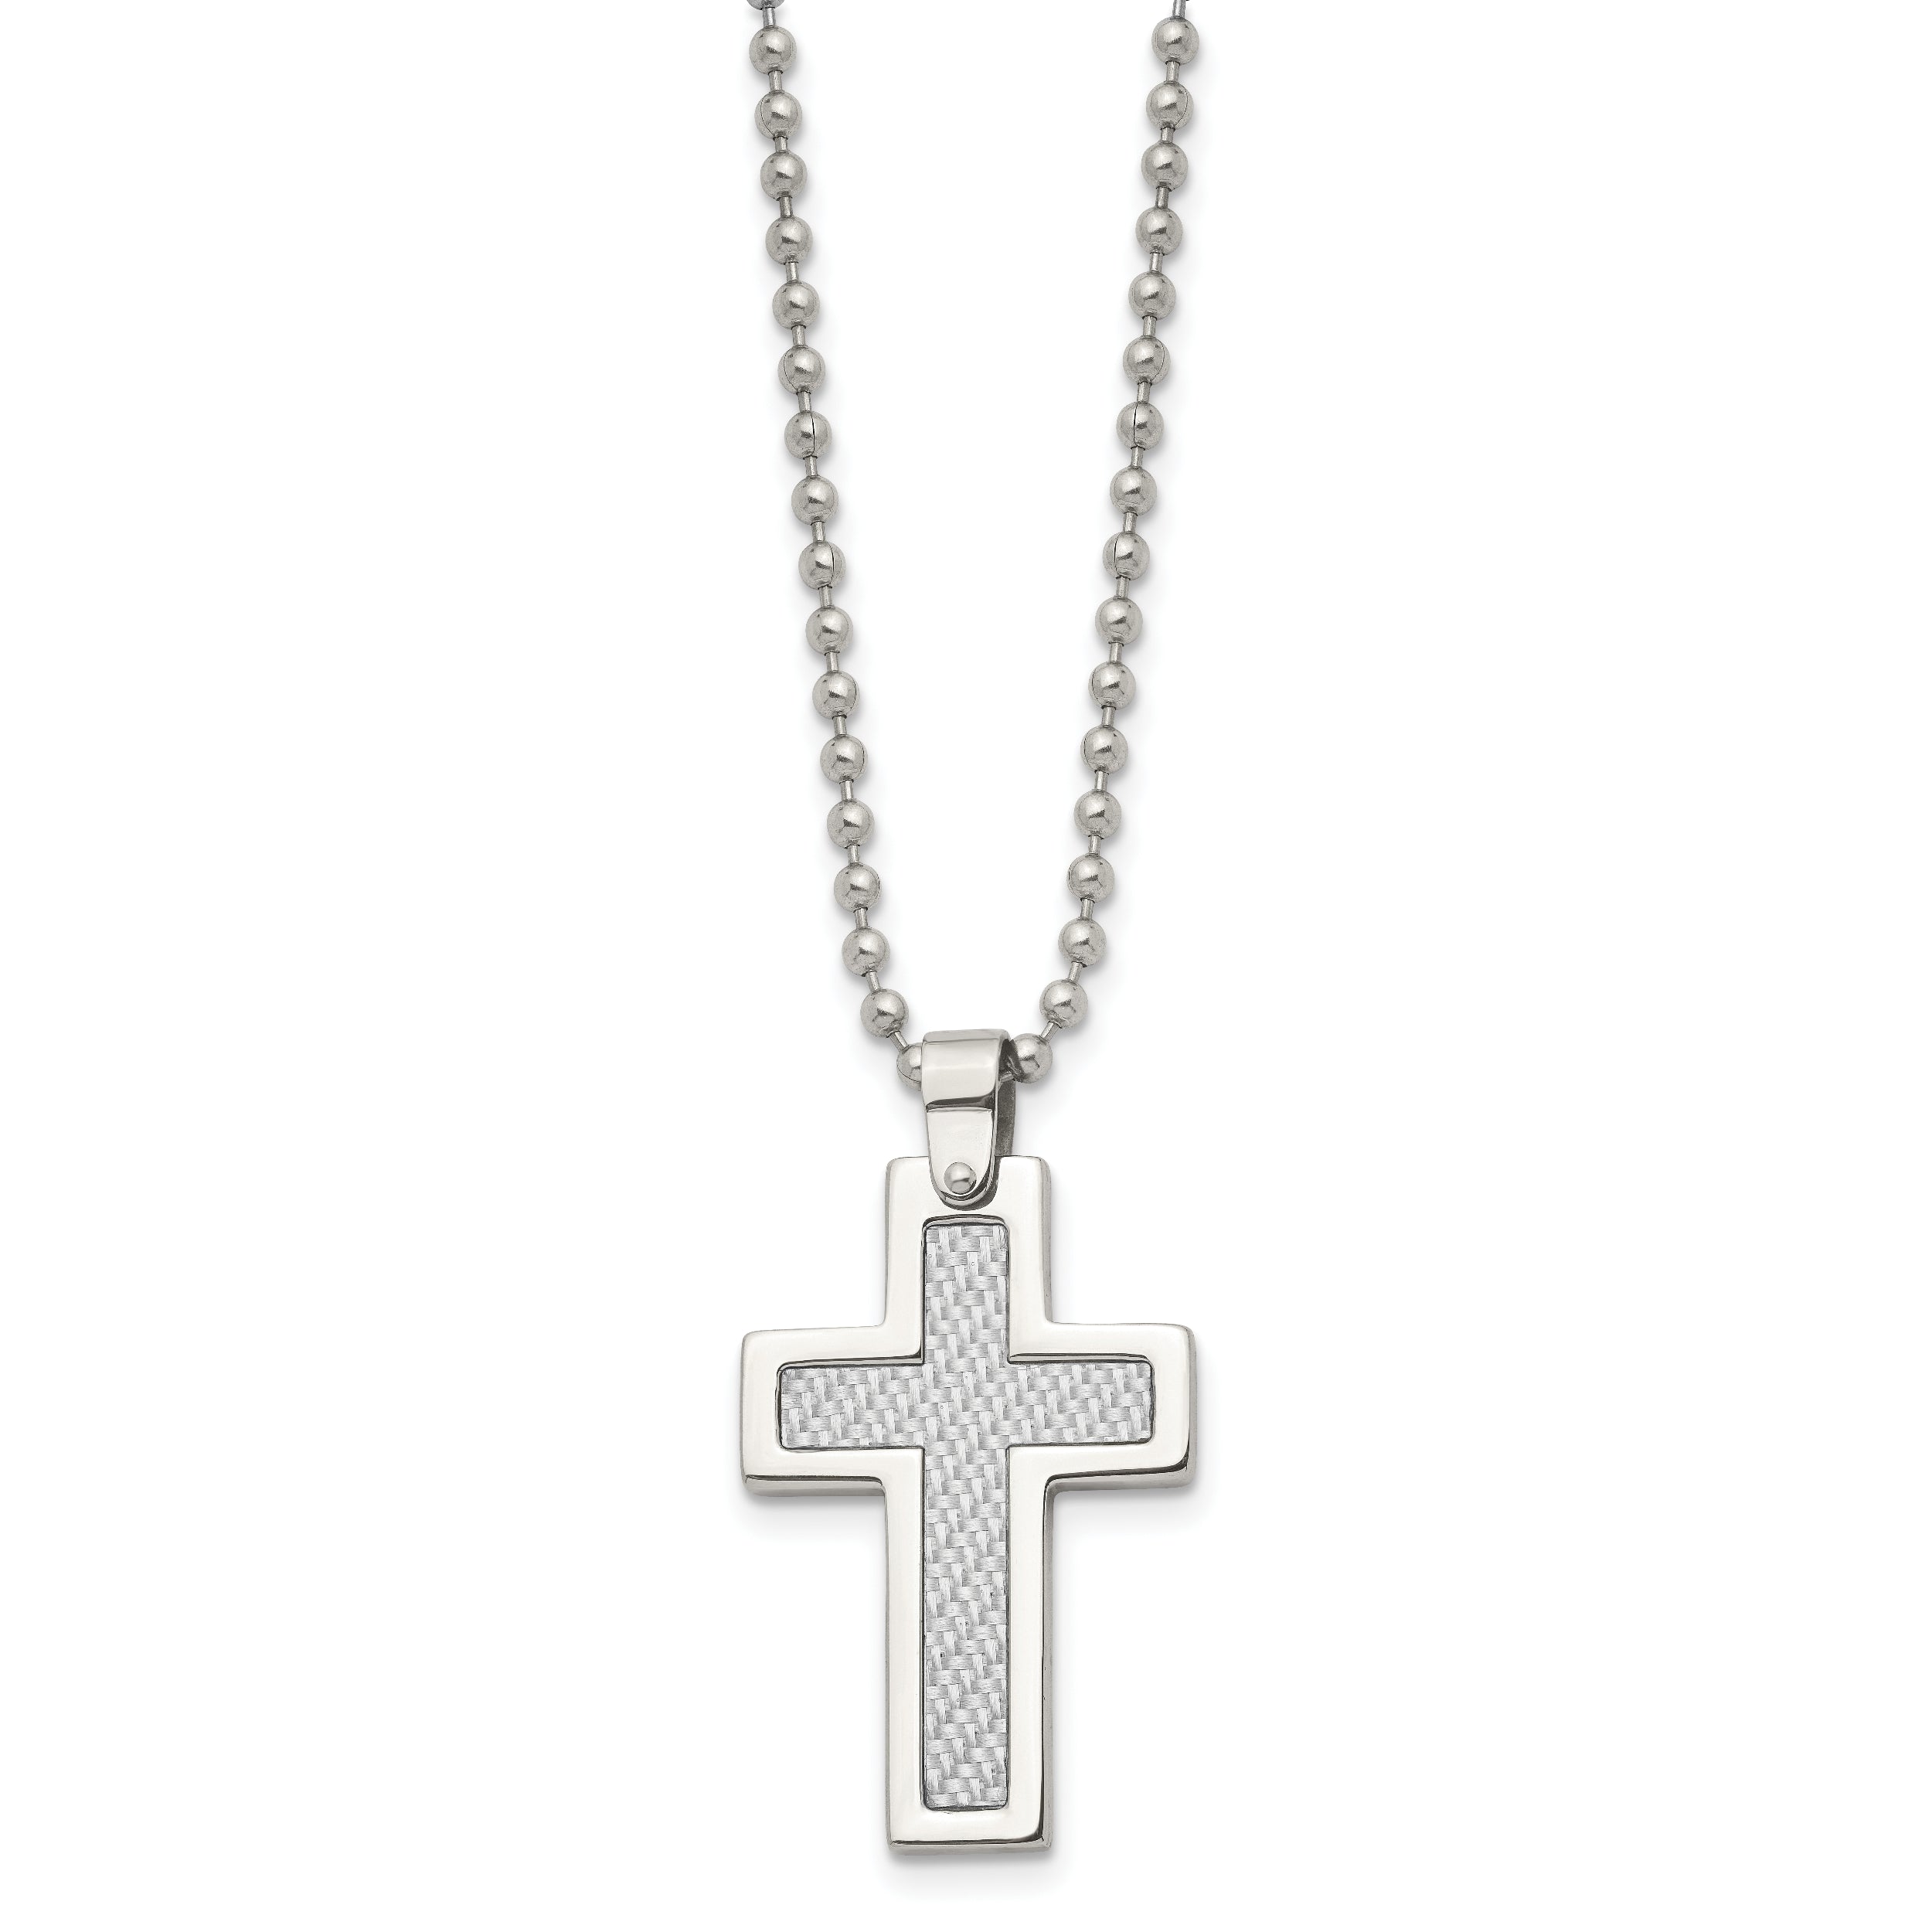 Chisel Stainless Steel Polished with Grey Carbon Fiber Inlay Cross Pendant on a 22 inch Ball Chain Necklace